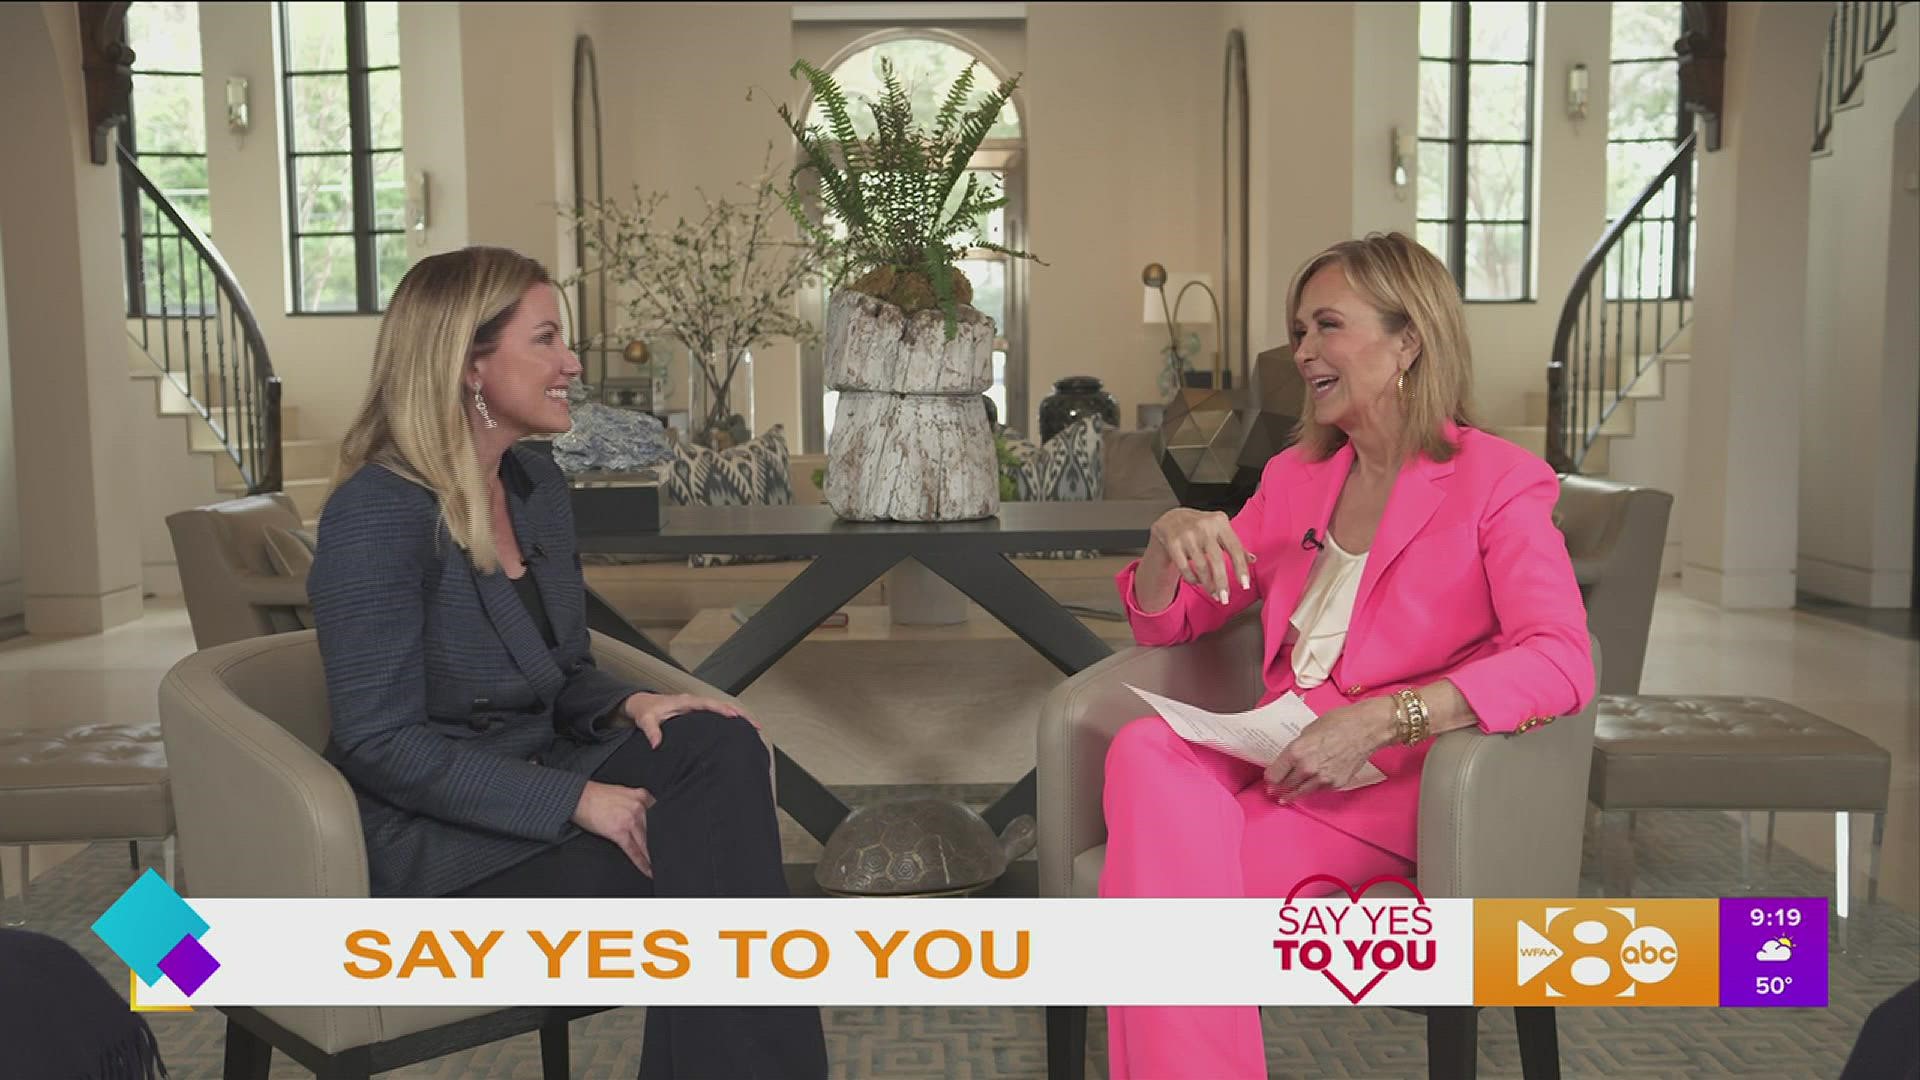 You know her from “The Real Housewives of Dallas” – Stephanie Hollman and Jane sit down for a very real discussion about self-love.